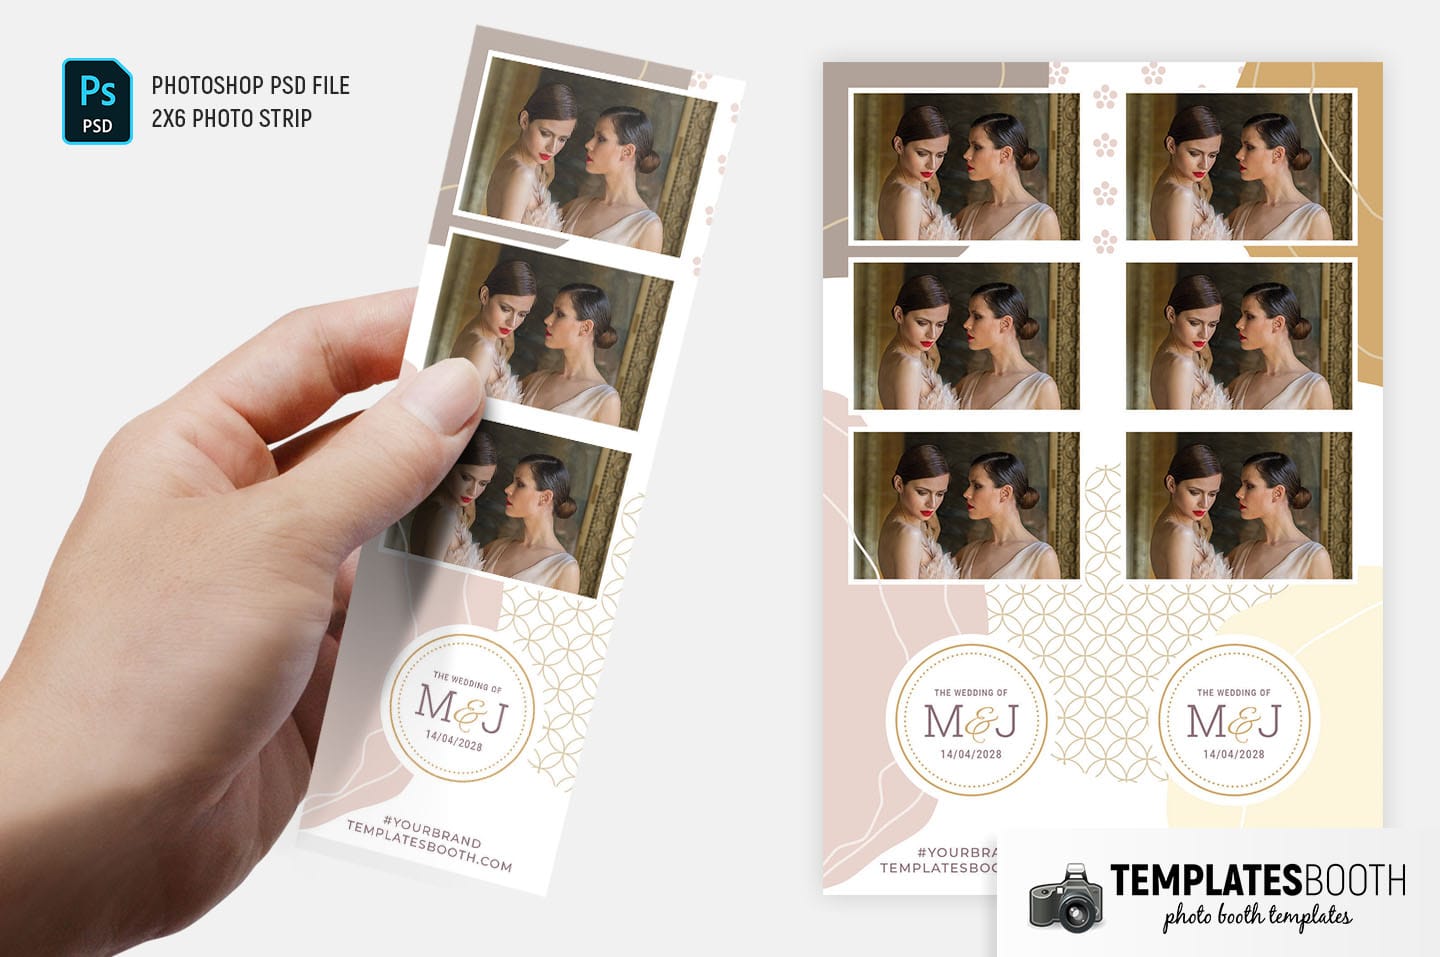 Fashionista Photo Booth Template